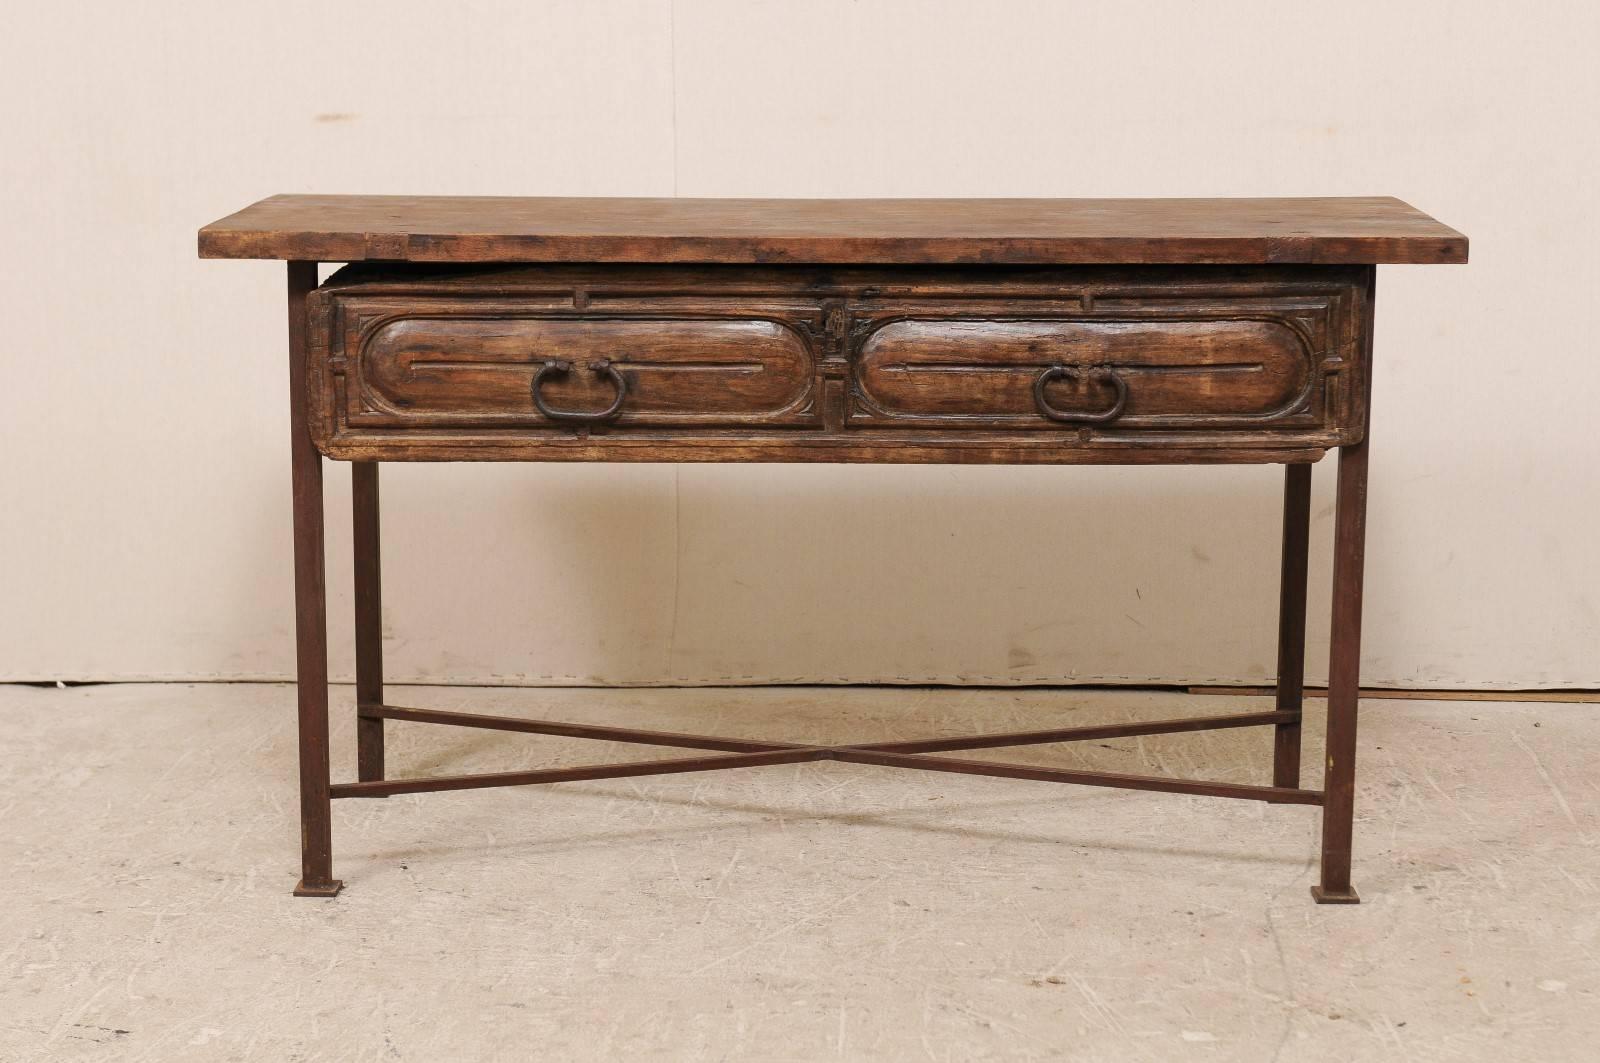 A custom table fashioned from an 18th century, Spanish drawer. This unique table features an exquisite 18th century Spanish wood carved drawer with it's original forged iron hardware. The drawer has been set into a custom patinated iron base and an